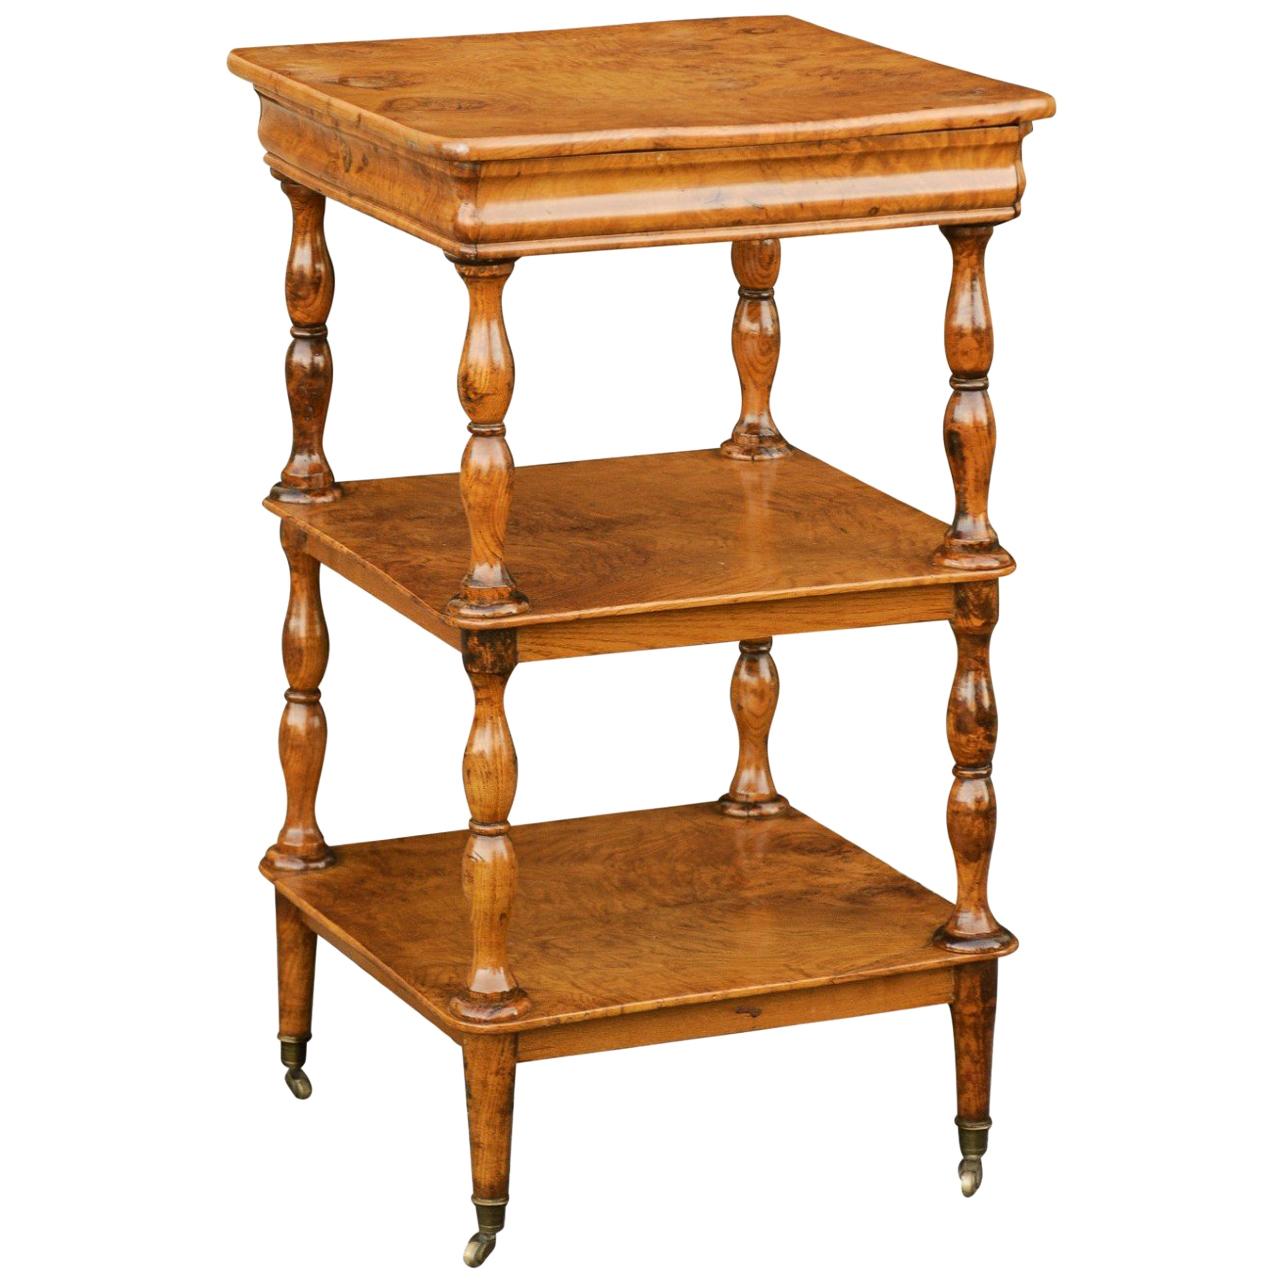 French Burled Walnut Three-Tiered Trolley with Butterfly Veneer, circa 1870